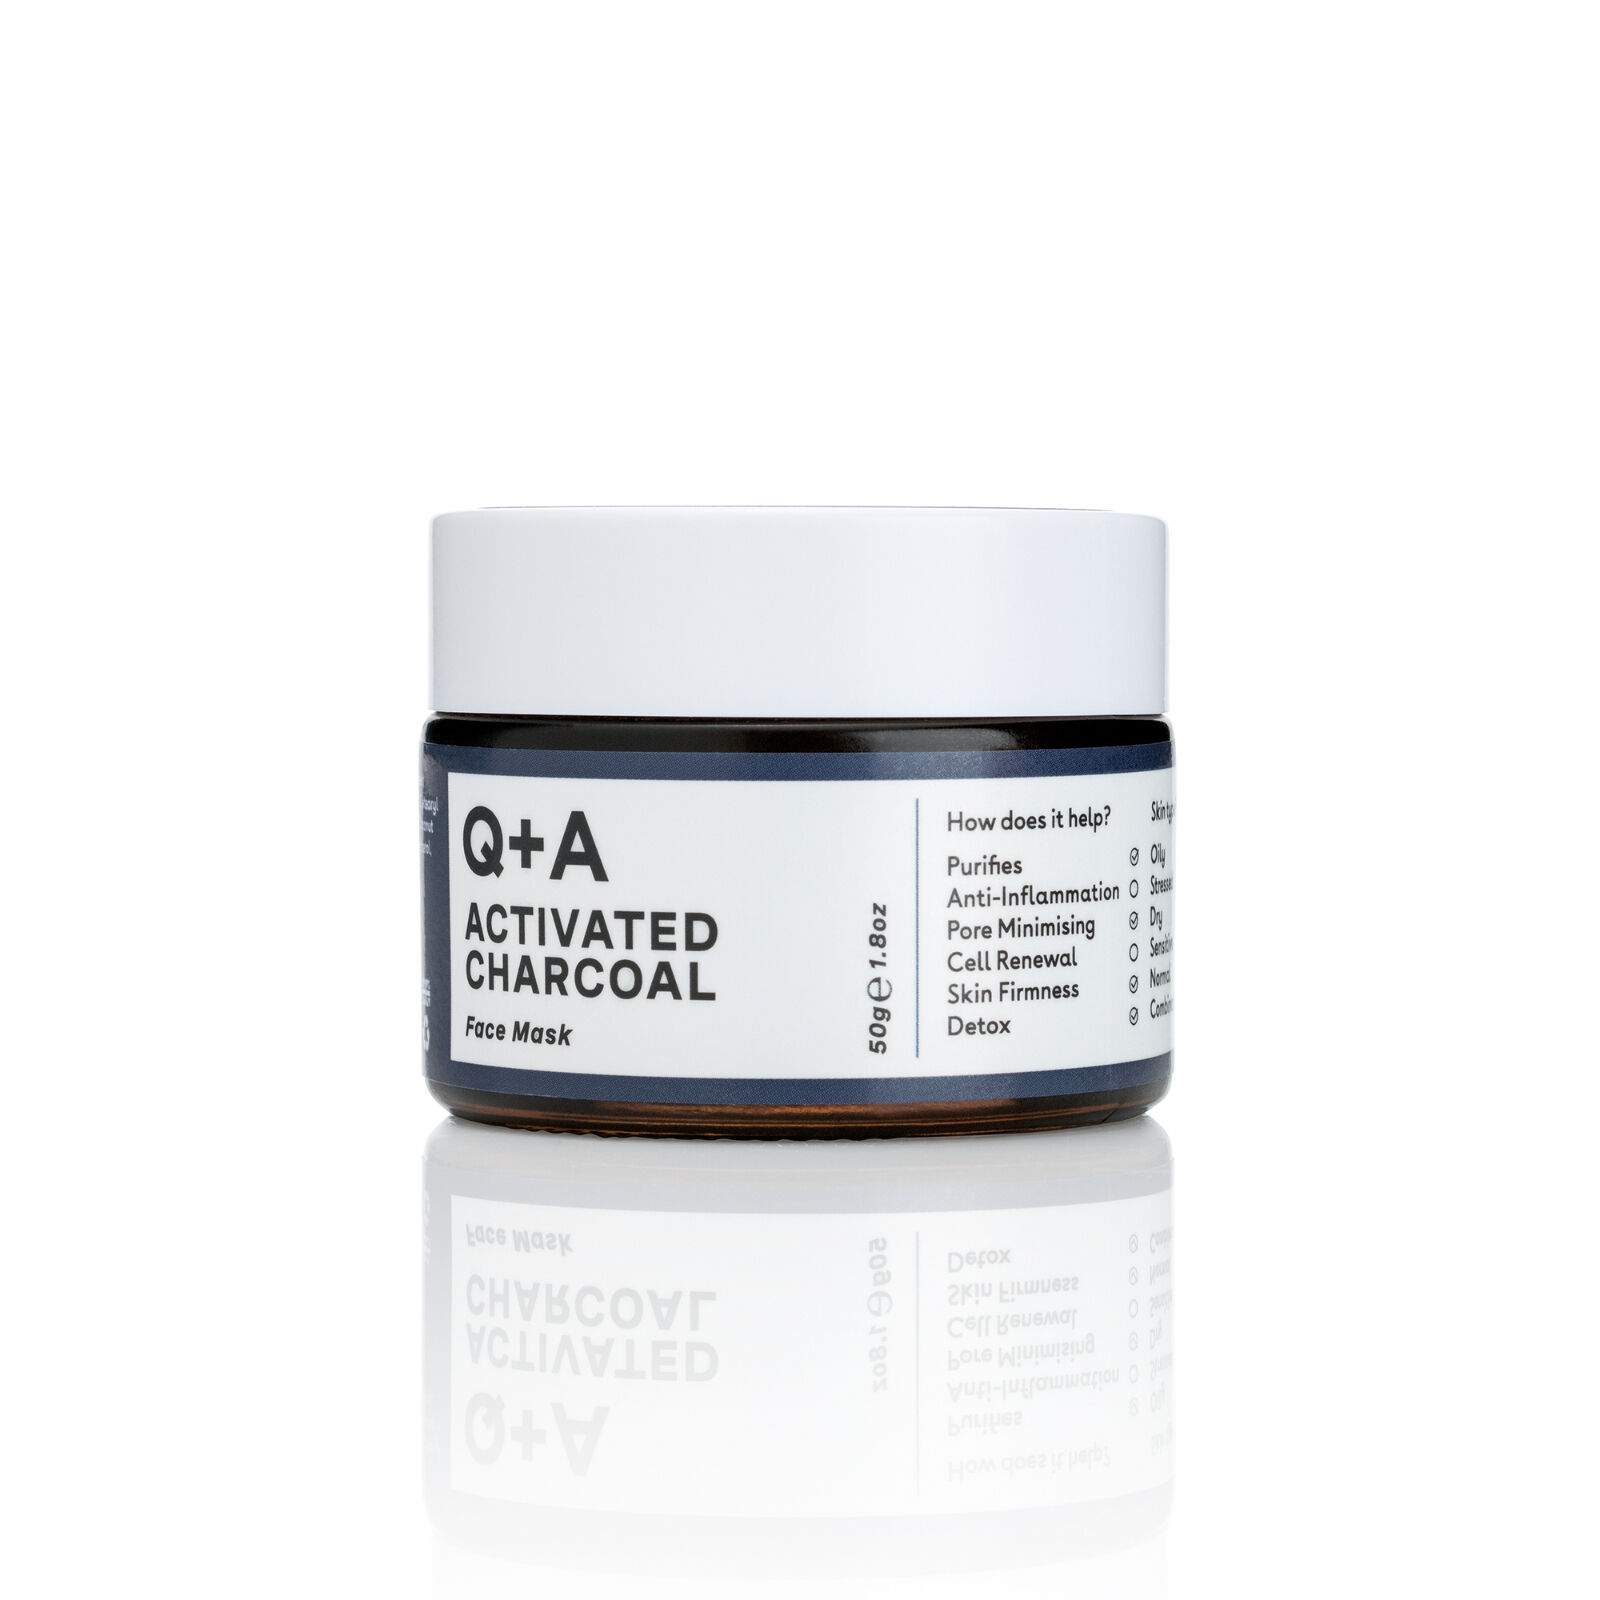 Q+a Activated Charcaol Face Mask